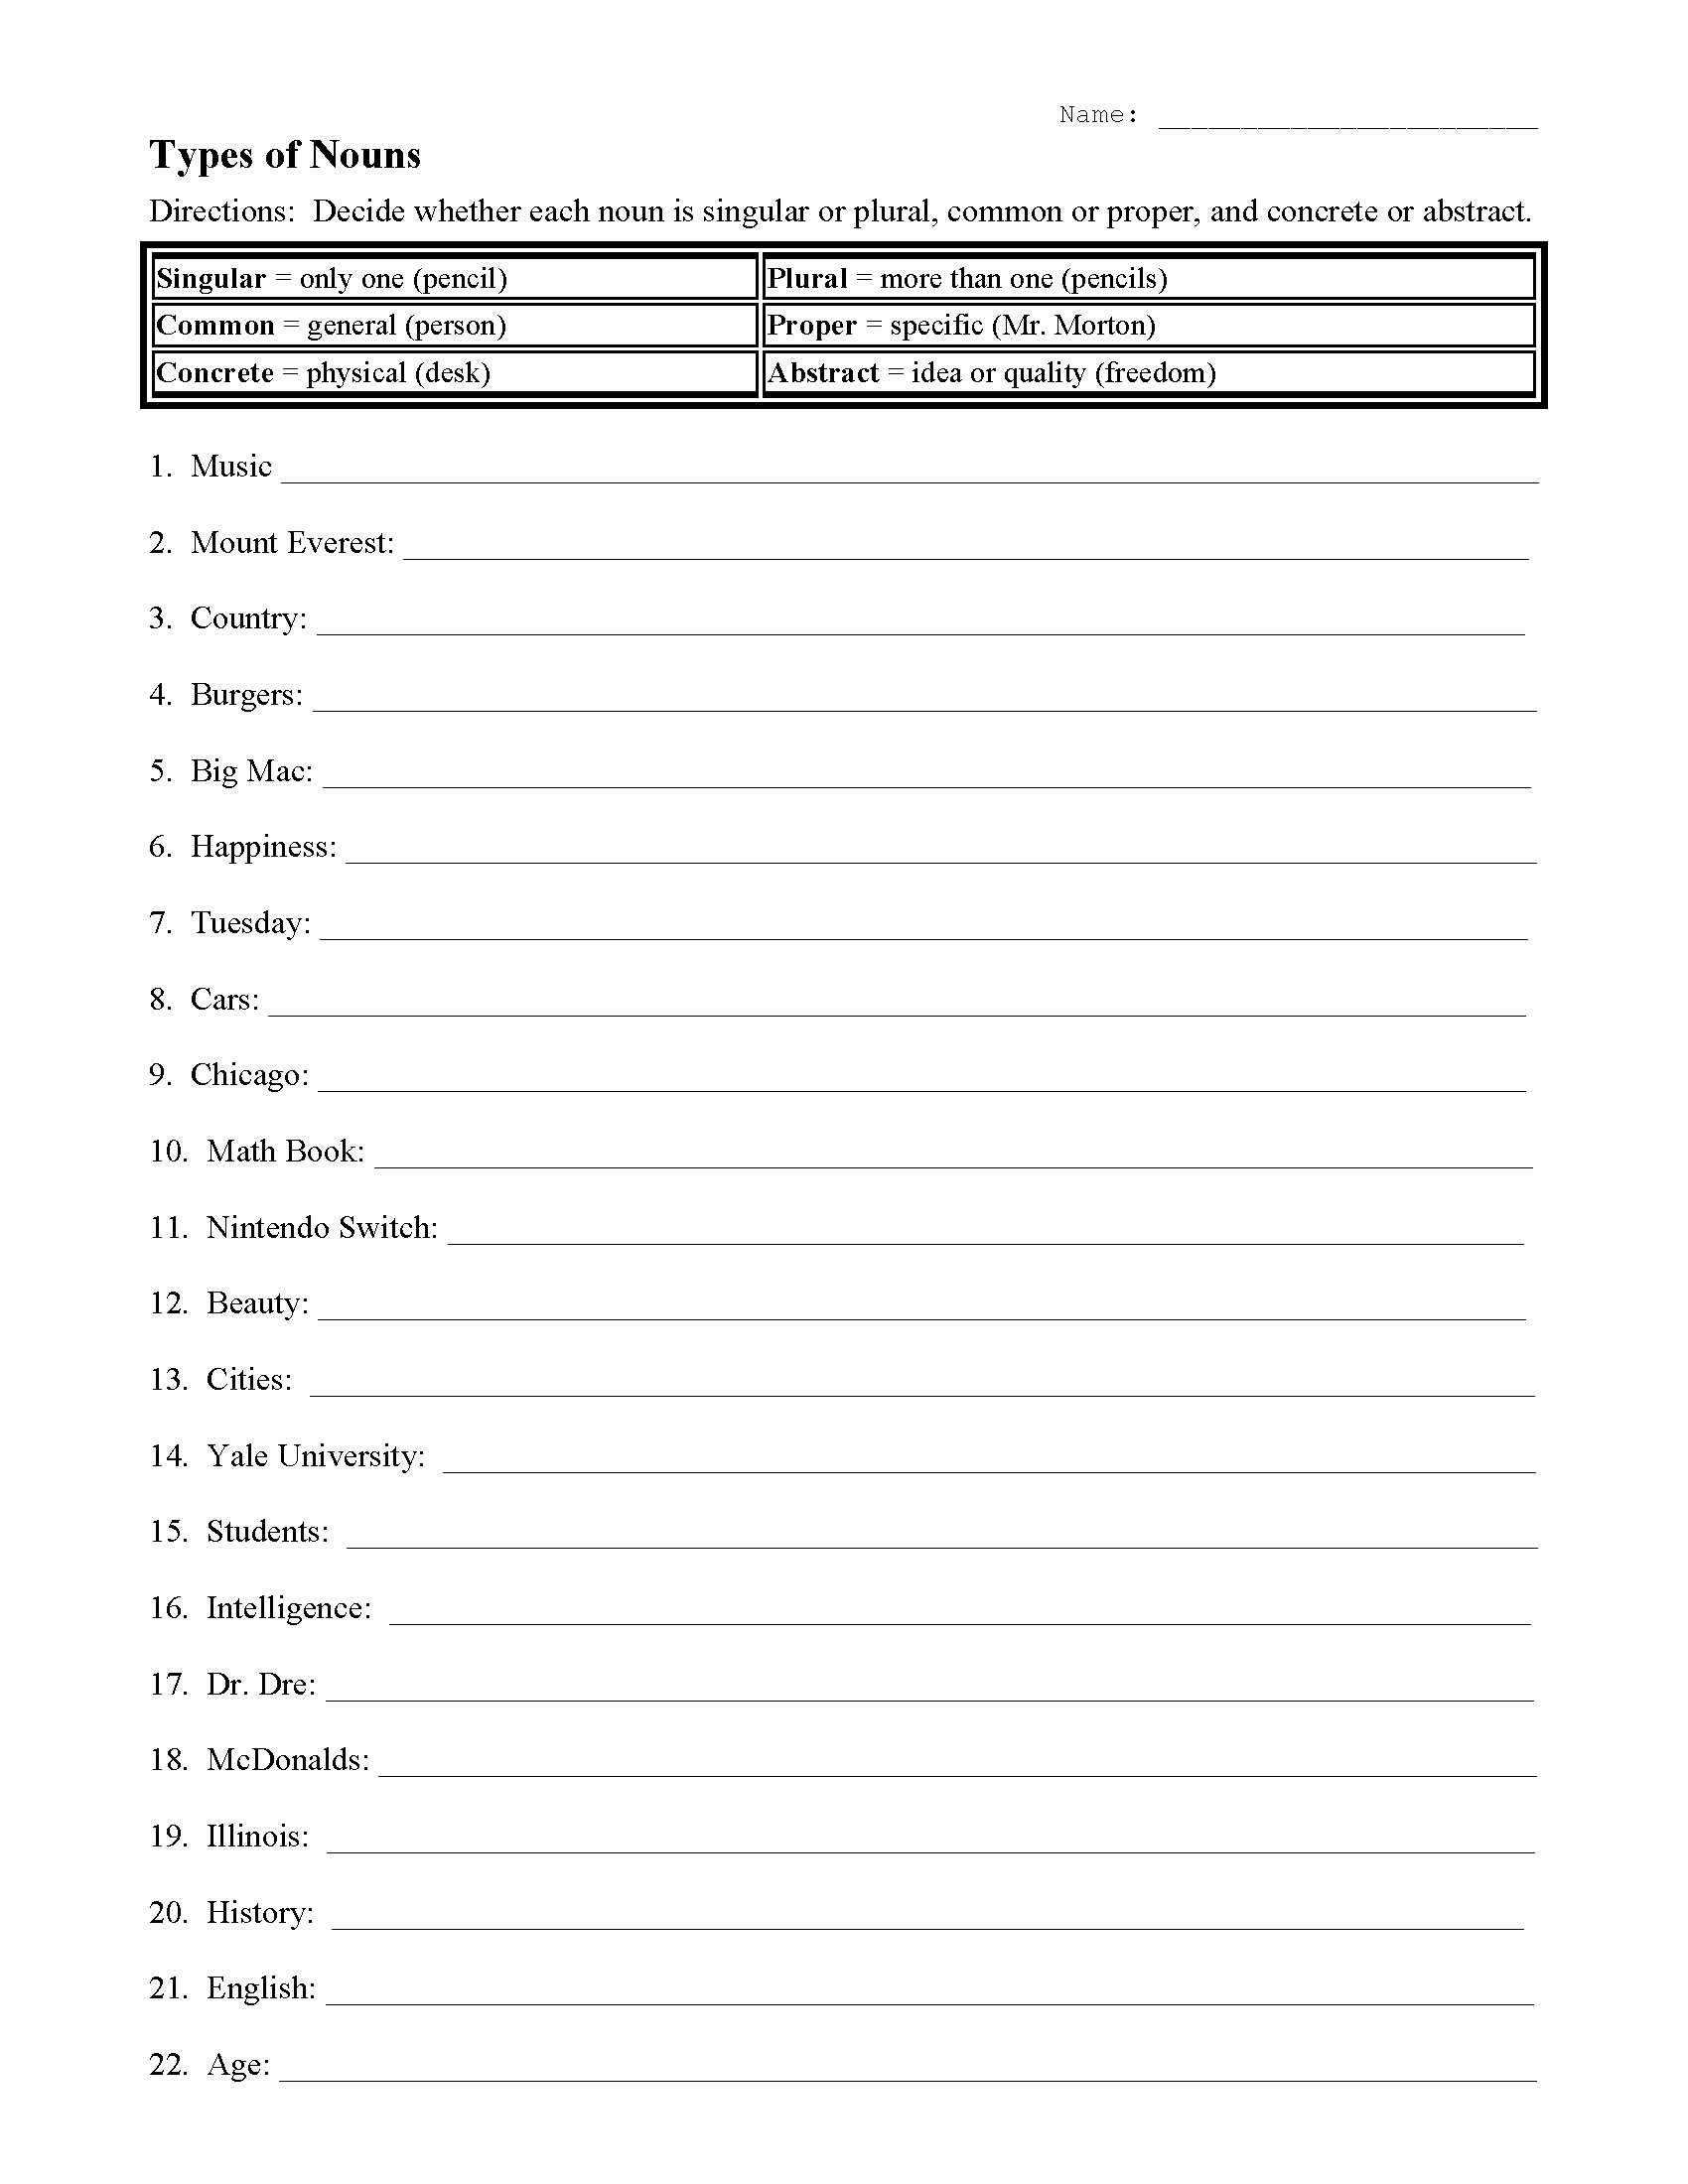 This is a preview image of Noun Types Worksheet 2. Click on it to enlarge it or view the source file.